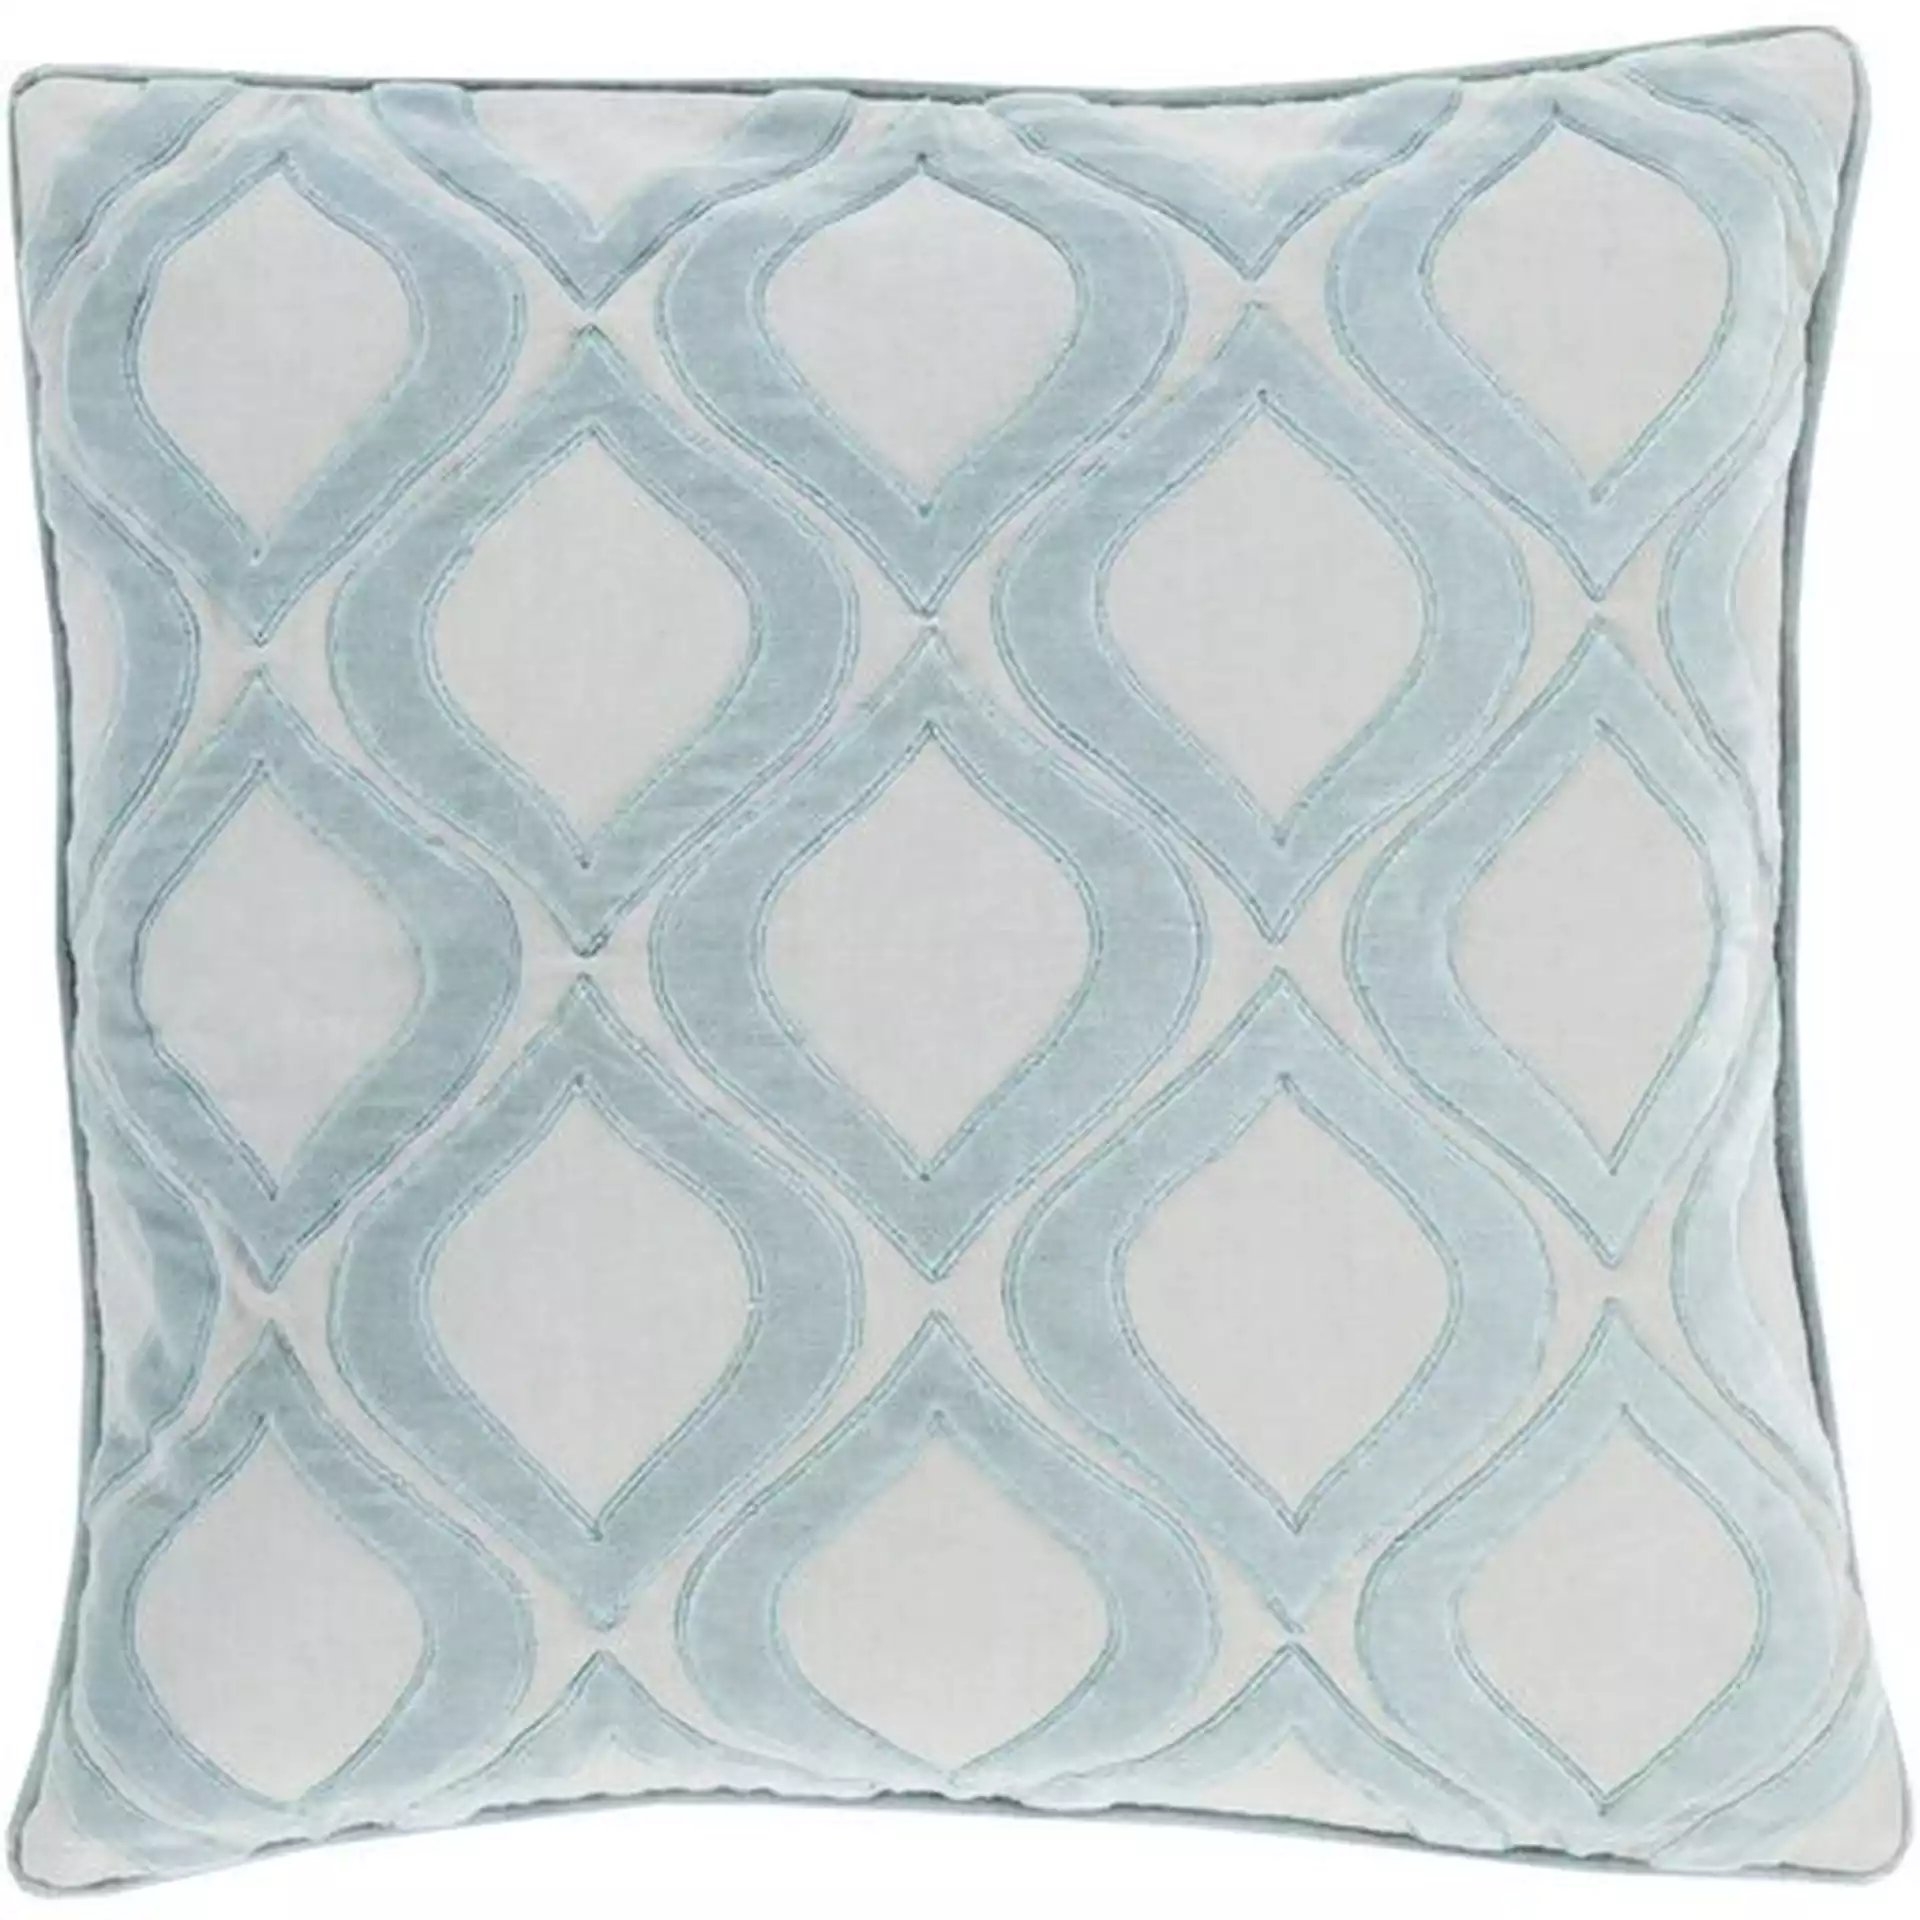 Alexandria Throw Pillow, 22" x 22", with down insert - Image 0